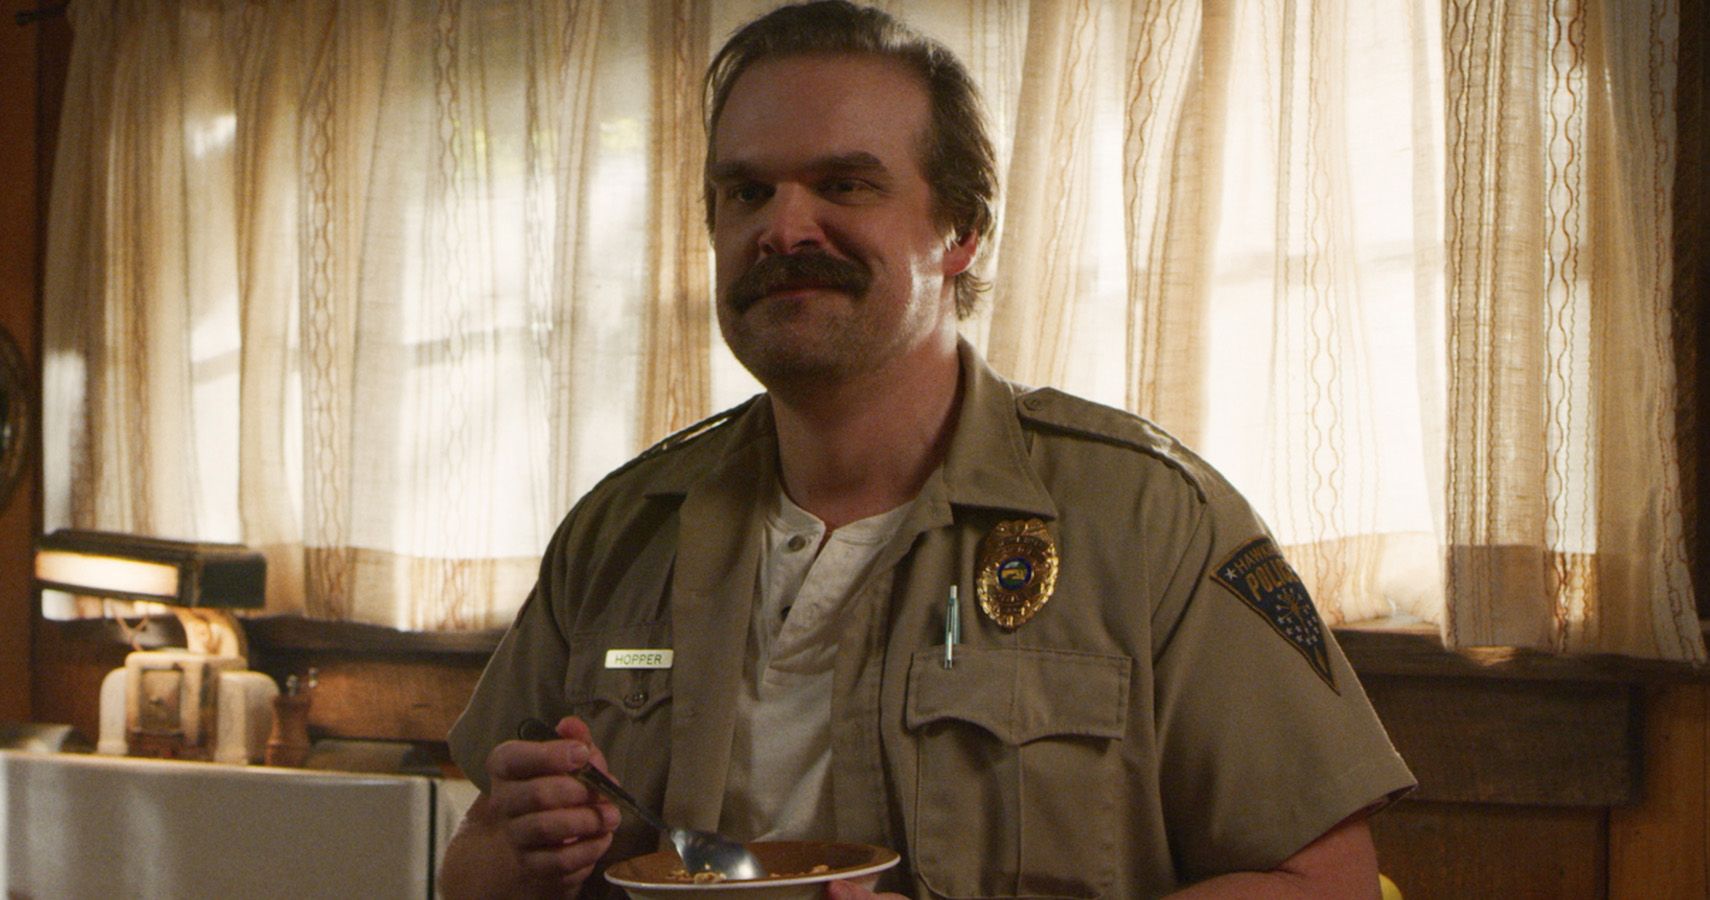 Best Theories About Jim Hopper's Fate/Death in Stranger Things 3 Finale